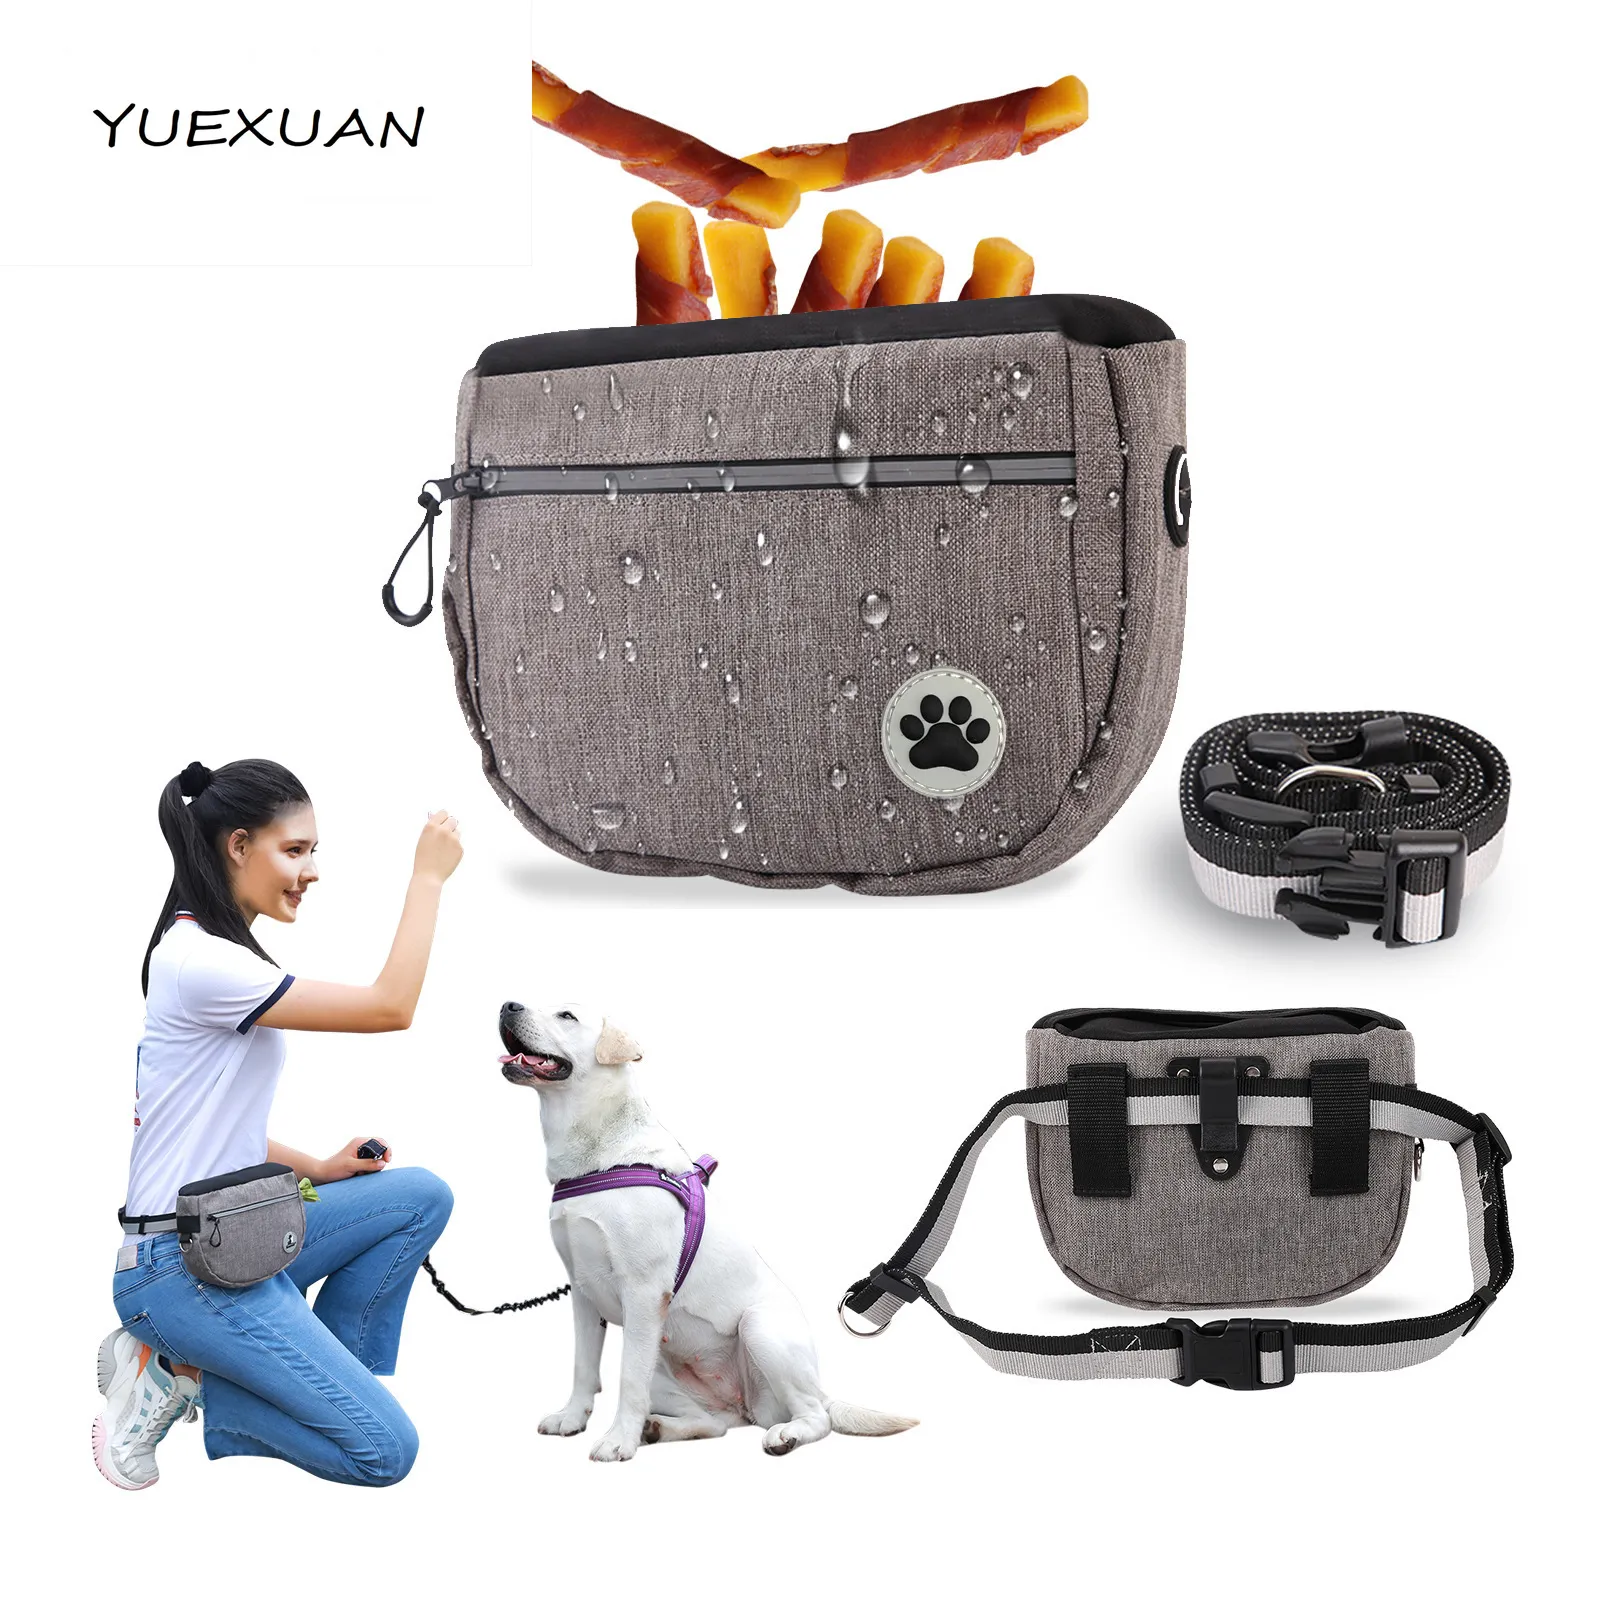 YUEXUAN Dog Cat Pet Training Snack Bag with Built-in Waste Bag Dispenser for Outings Perfect Dog Walking Accessory